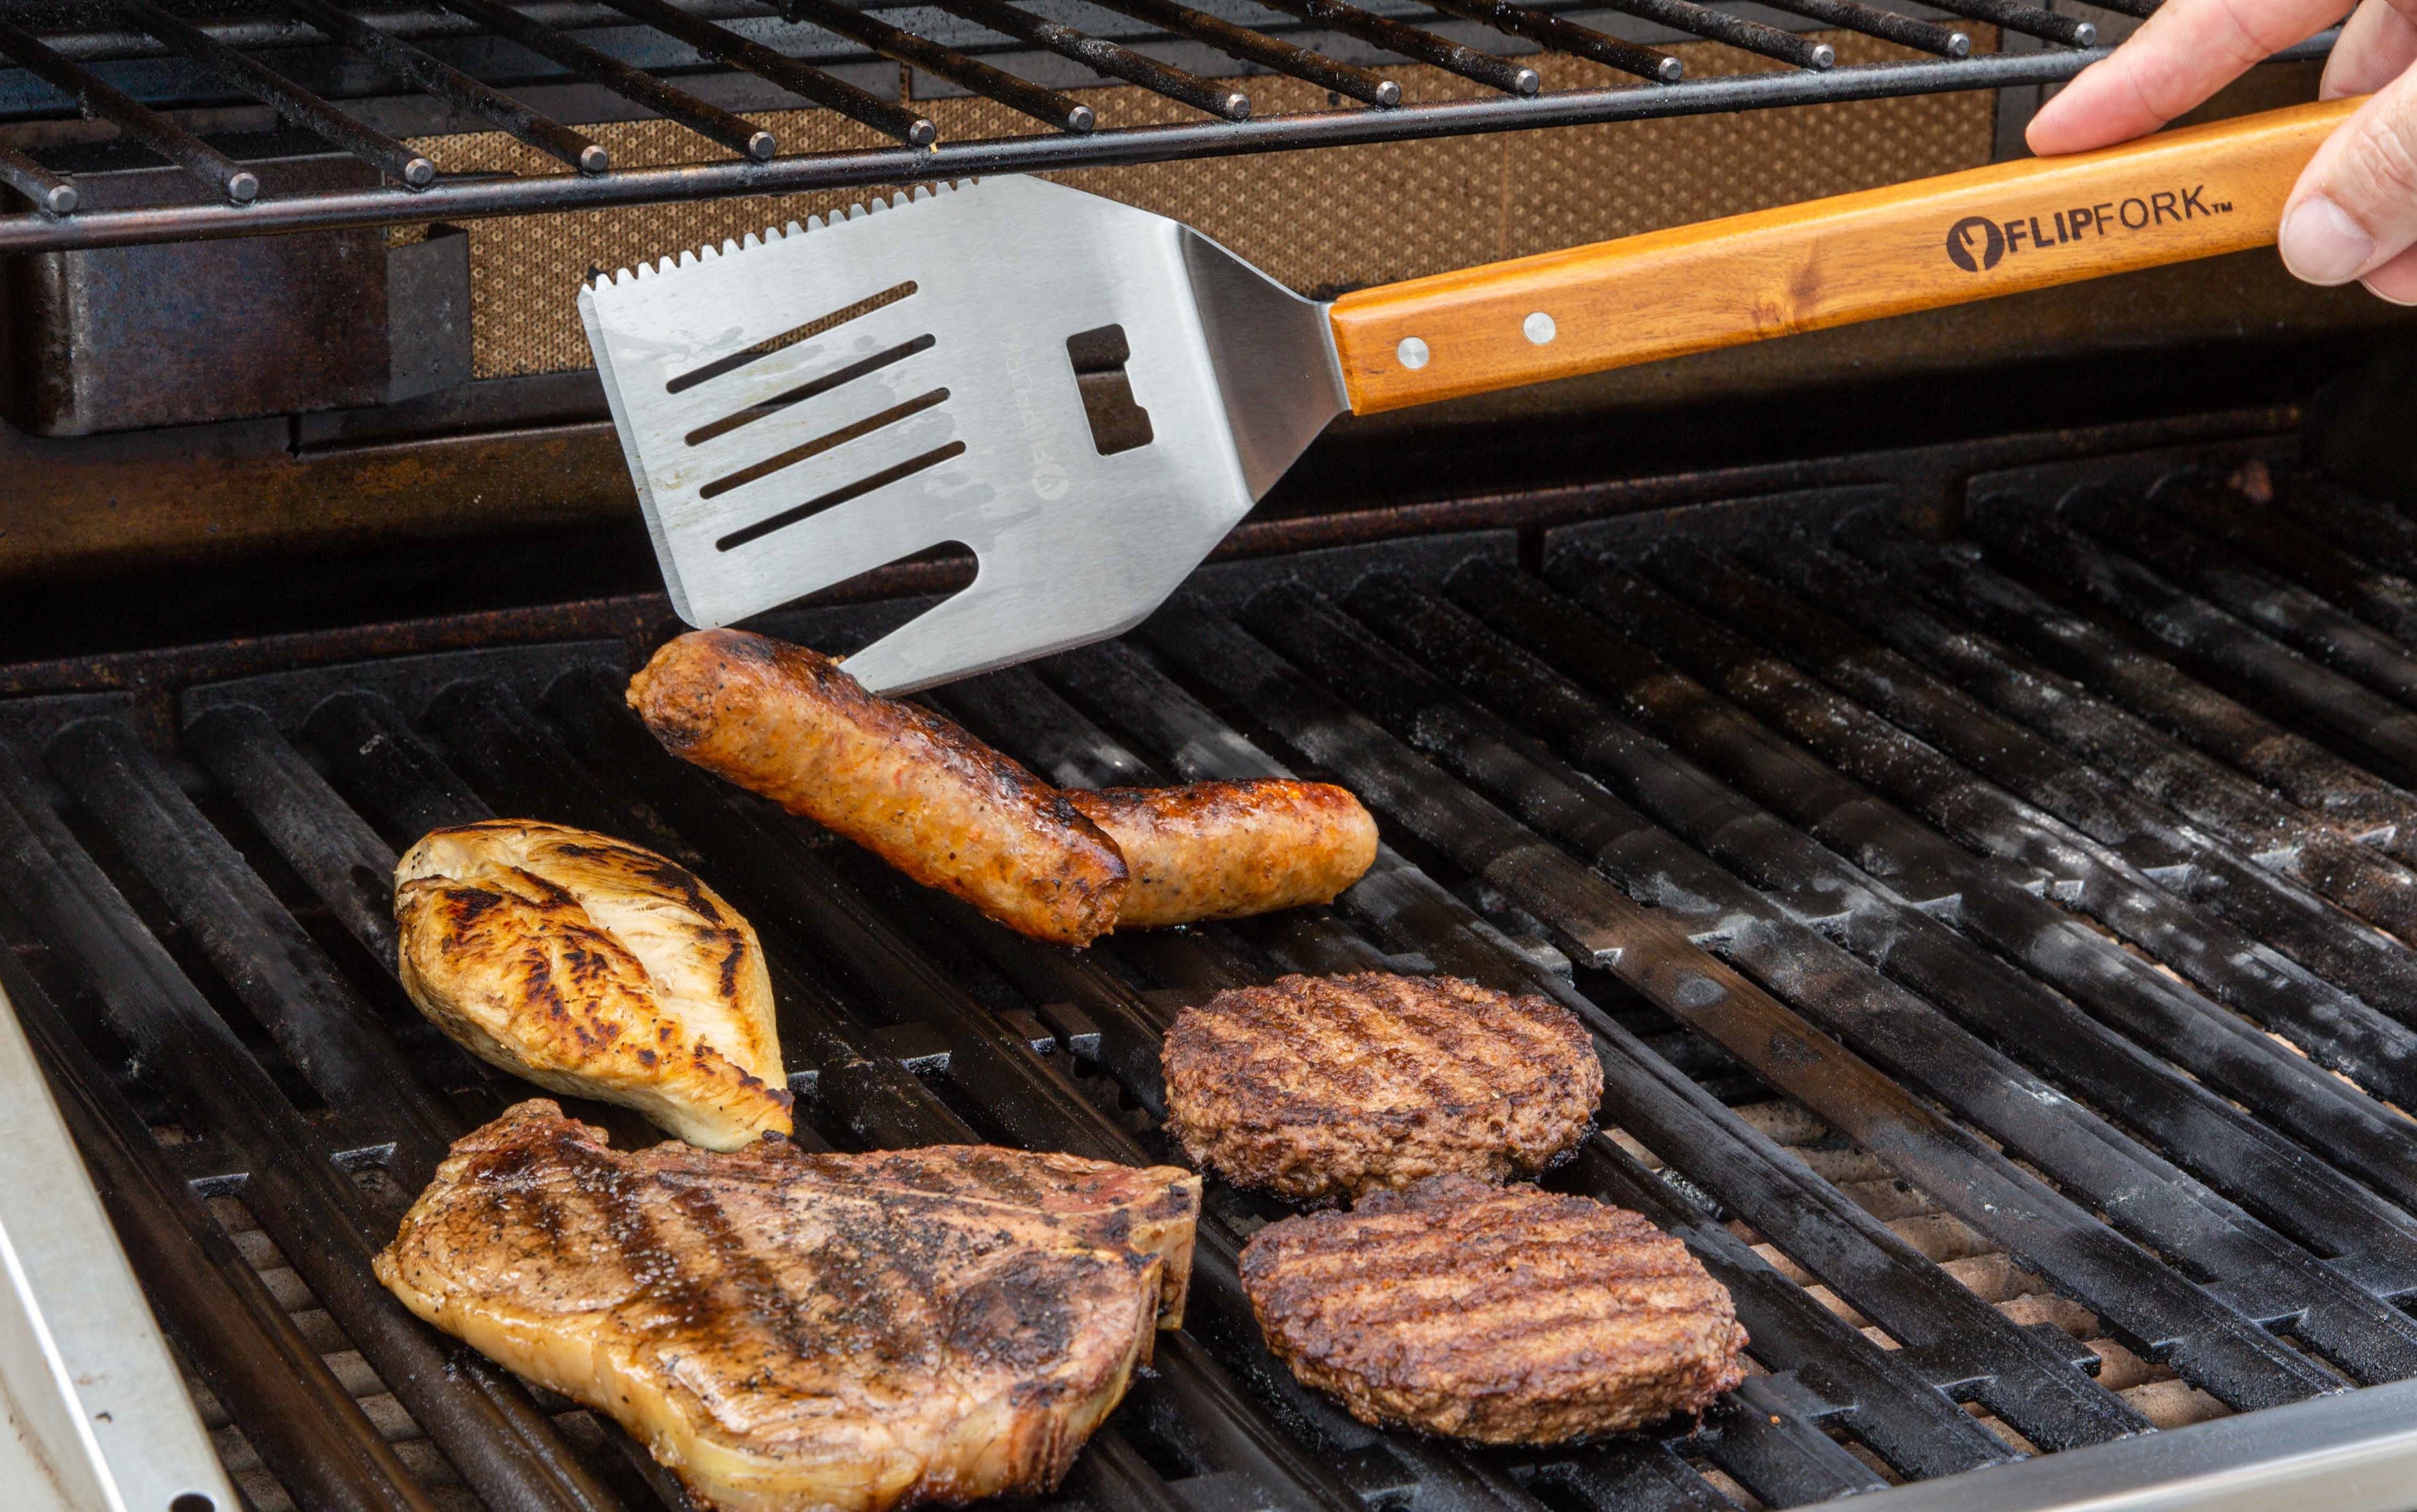 This New Gadget is the Ultimate 5-in-1 Grilling Tool